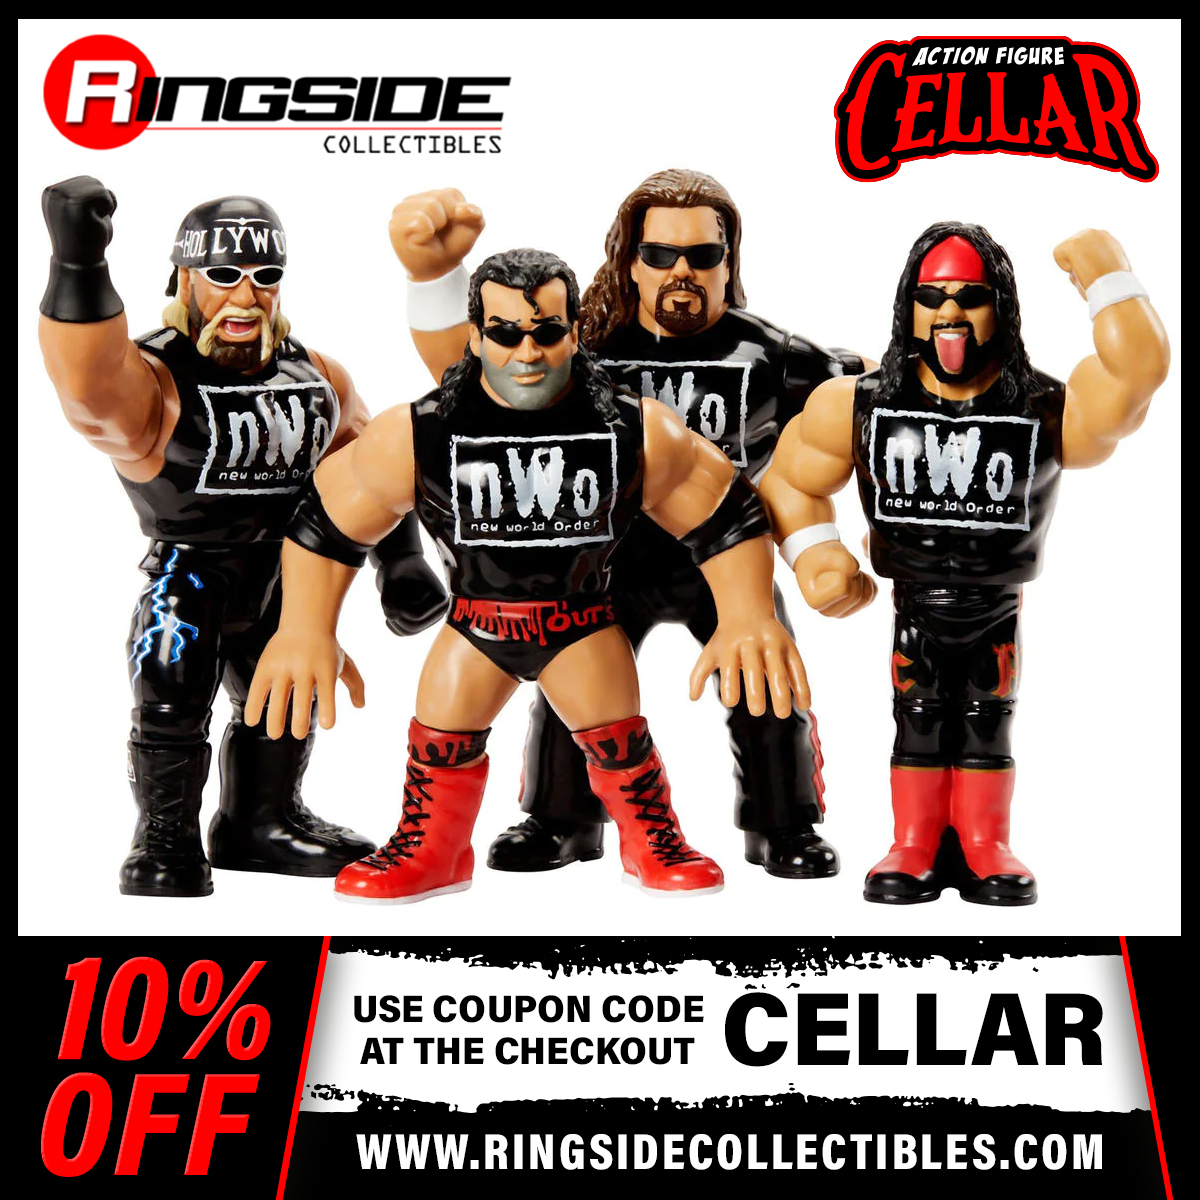 🚨 NWO RETRO 2-PACKS 🚨

⏰ Available today 🇬🇧 5 PM GMT & 🇺🇸 12 PM EST

Pre-Order the #nWo Retro #RingsideExclusive 2-Packs at ringsidecollectibles.com

Featuring #HollywoodHulkHogan / #Syxx & #KevinNash / #ScottHall

Use the coupon code CELLAR at the checkout to get 10% OFF!